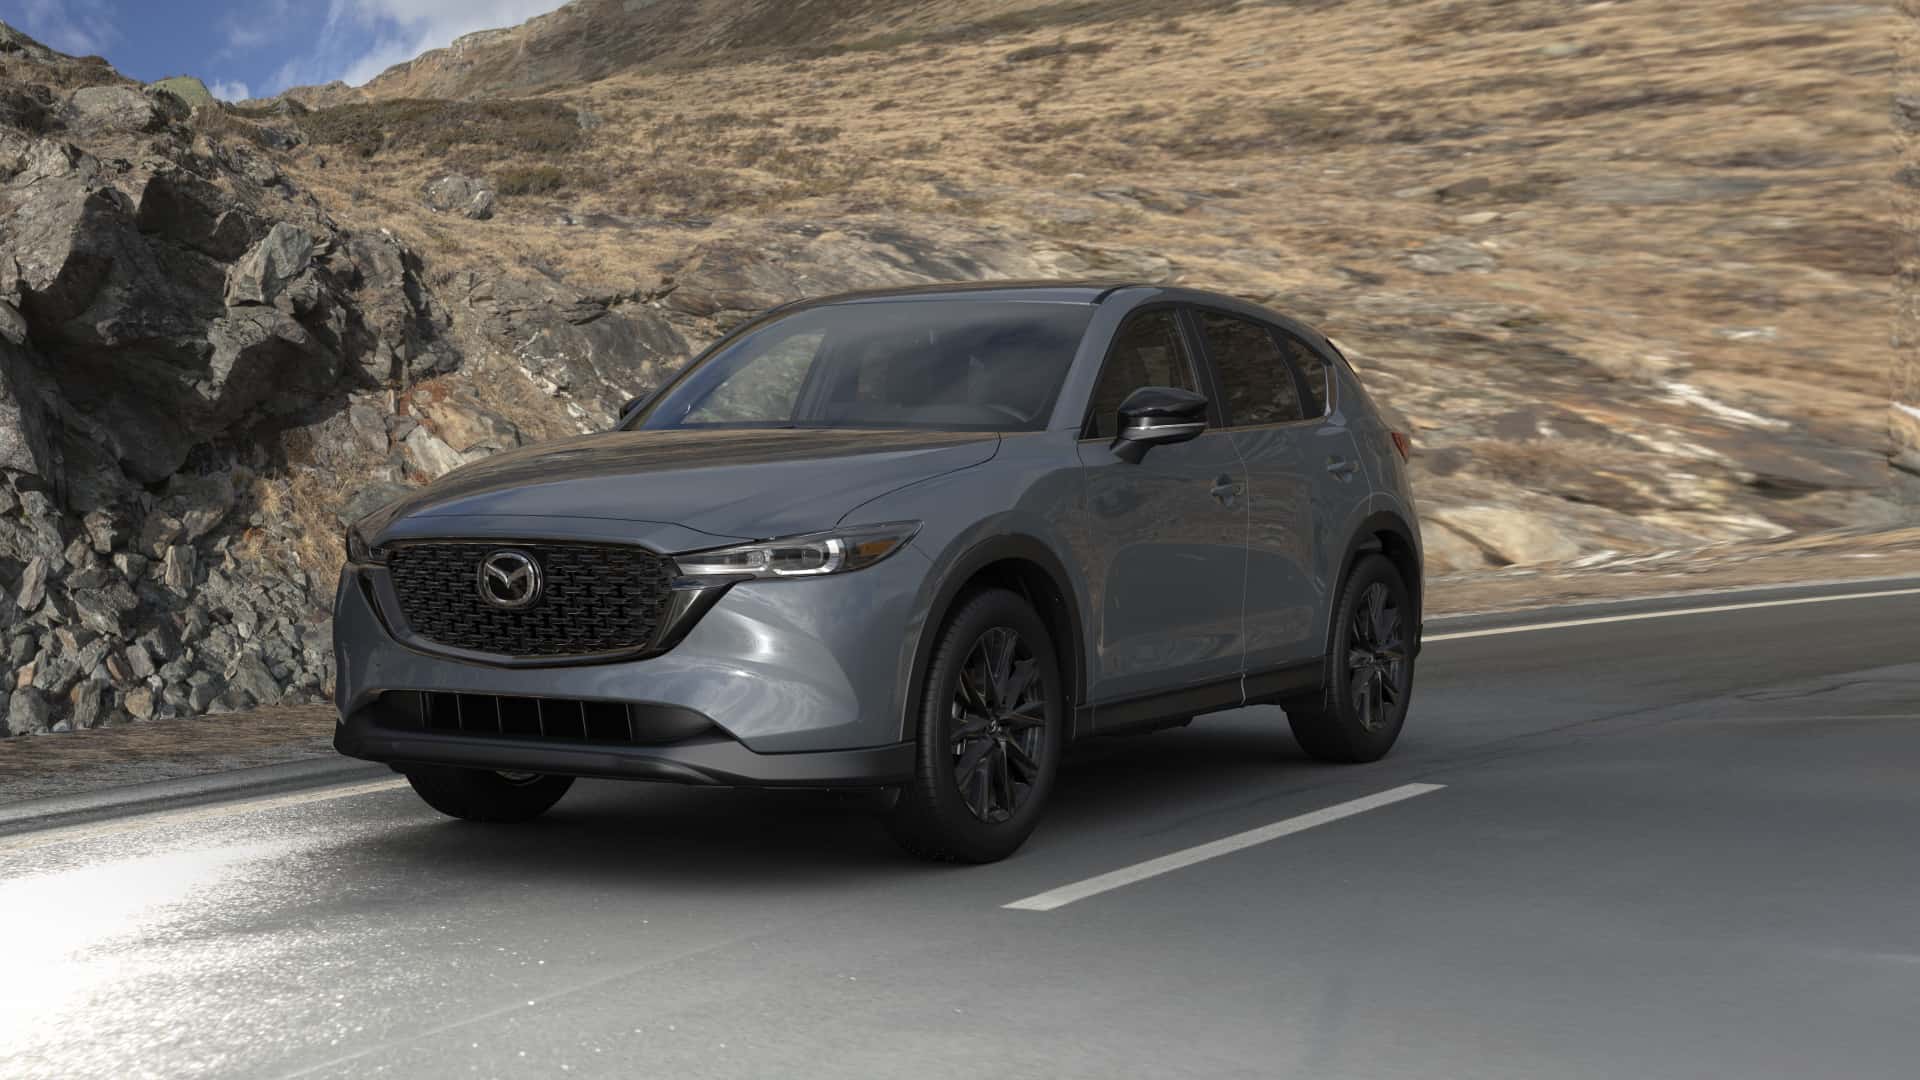 2023 Mazda CX-5 2.5 S Carbon Edition Polymetal Gray Metallic | Bommarito Mazda St. Peters in St. Peters MO